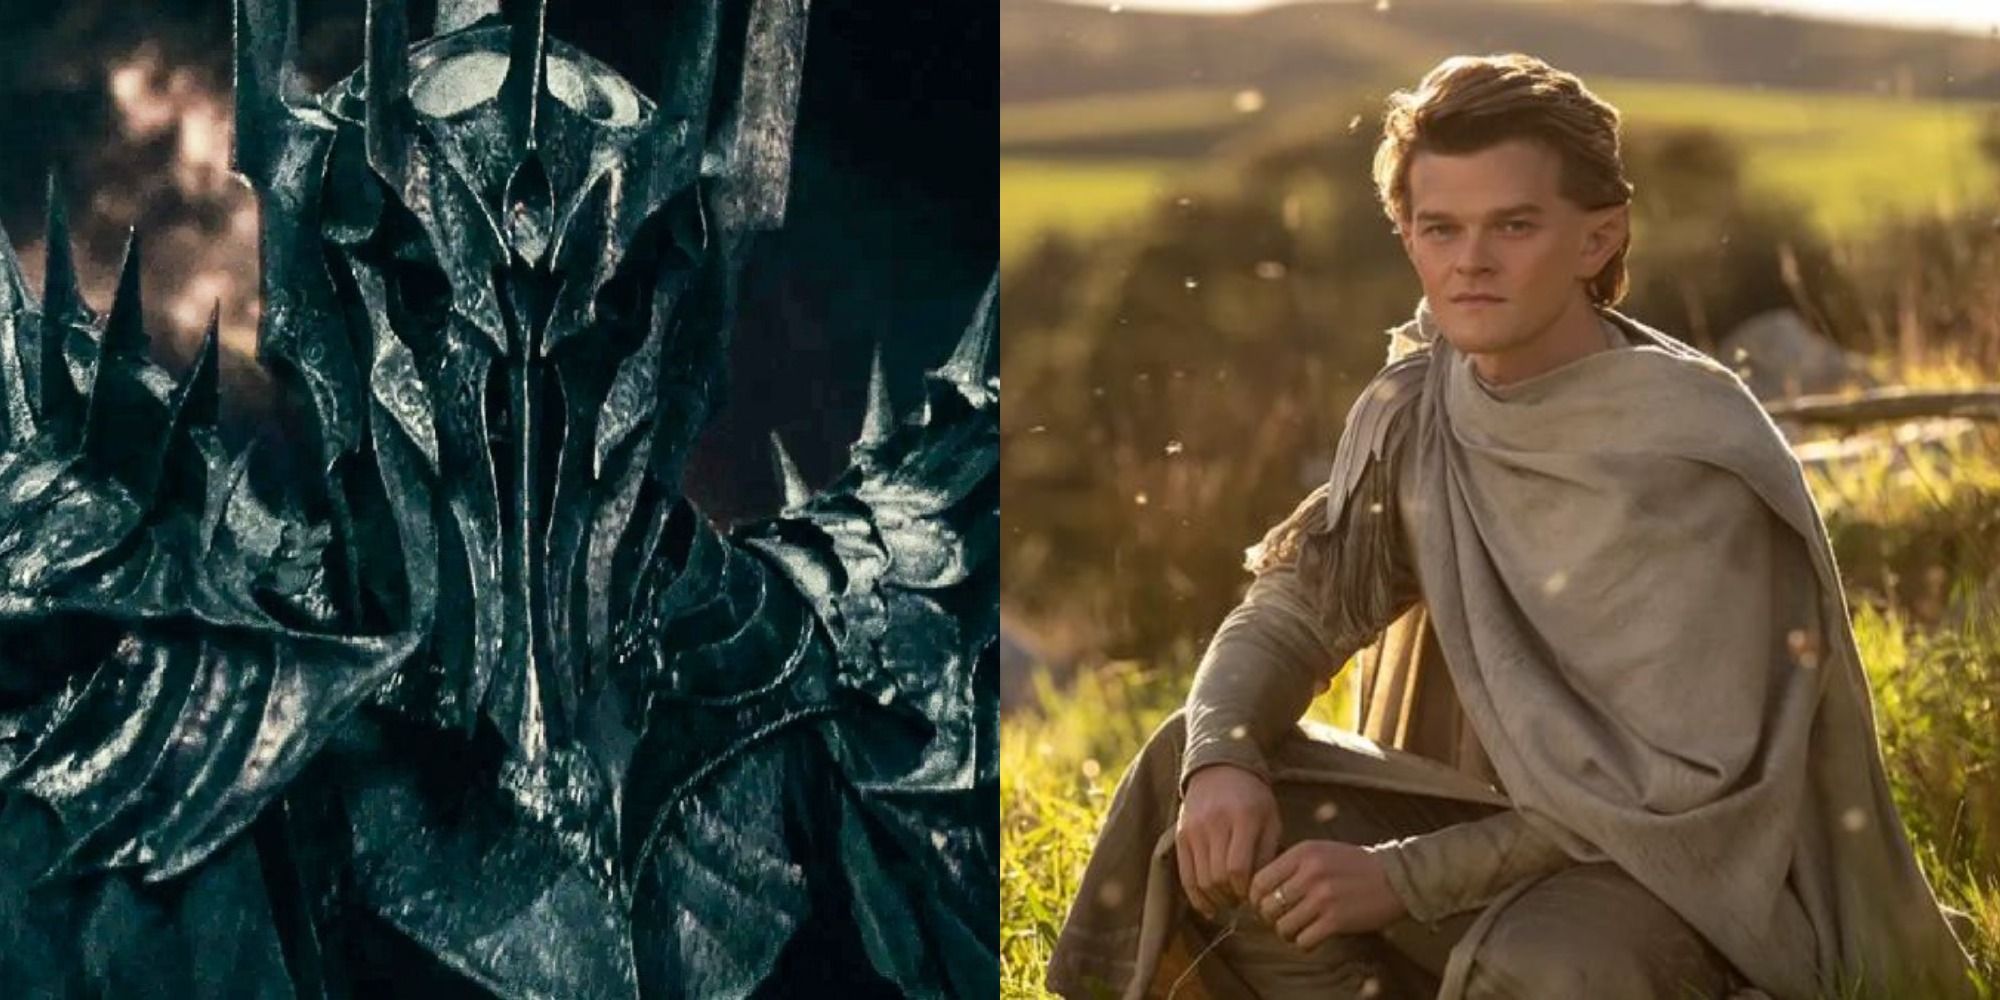 Split image showing Sauron in TLOTR and Elrond in Rings of Power.